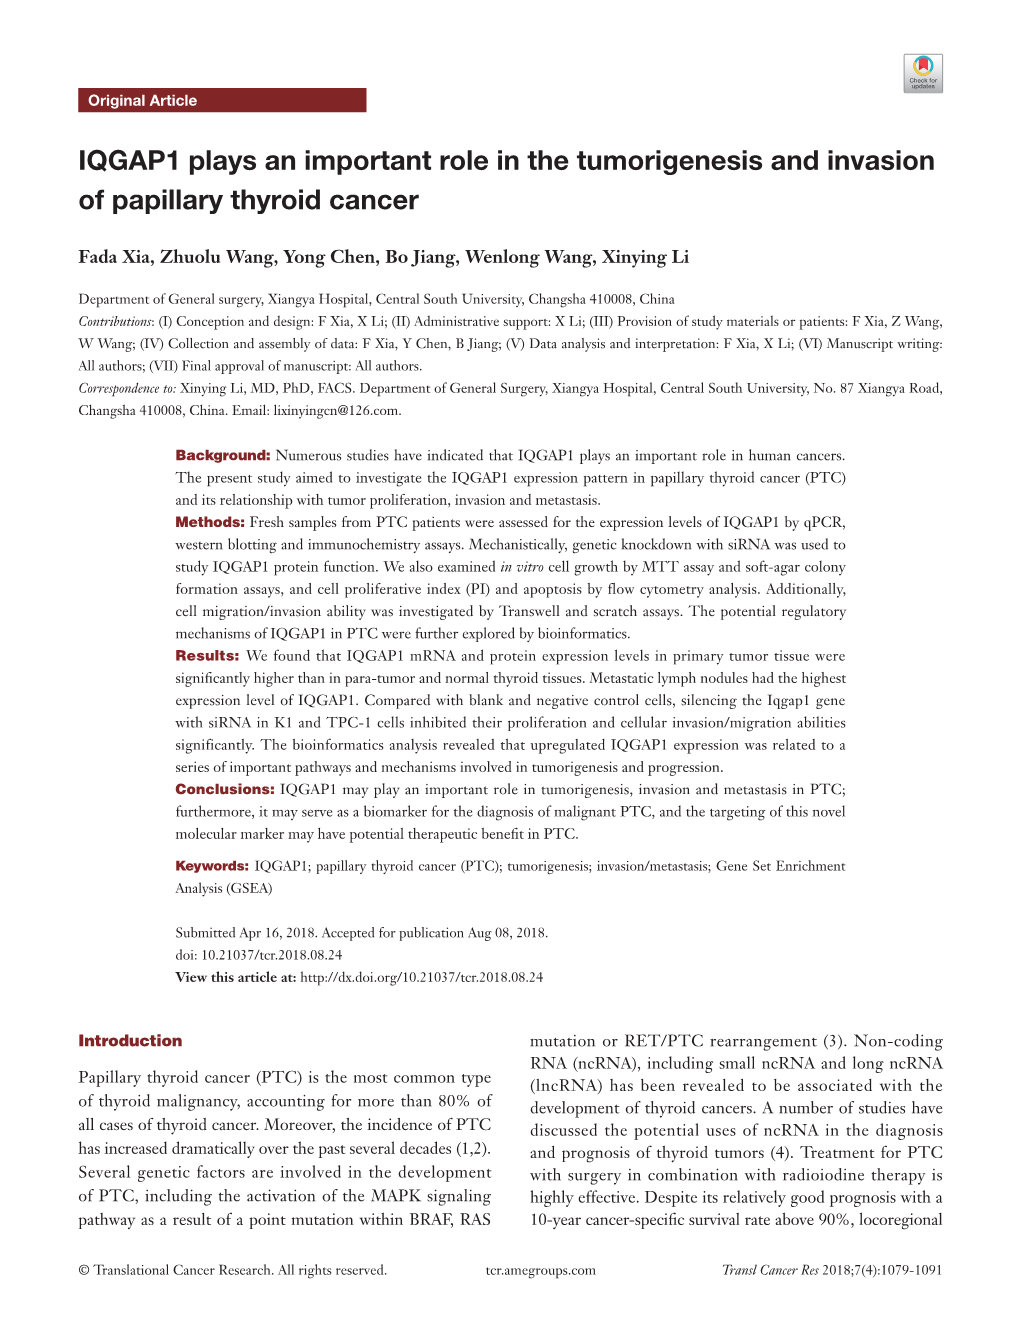 IQGAP1 Plays an Important Role in the Tumorigenesis and Invasion of Papillary Thyroid Cancer